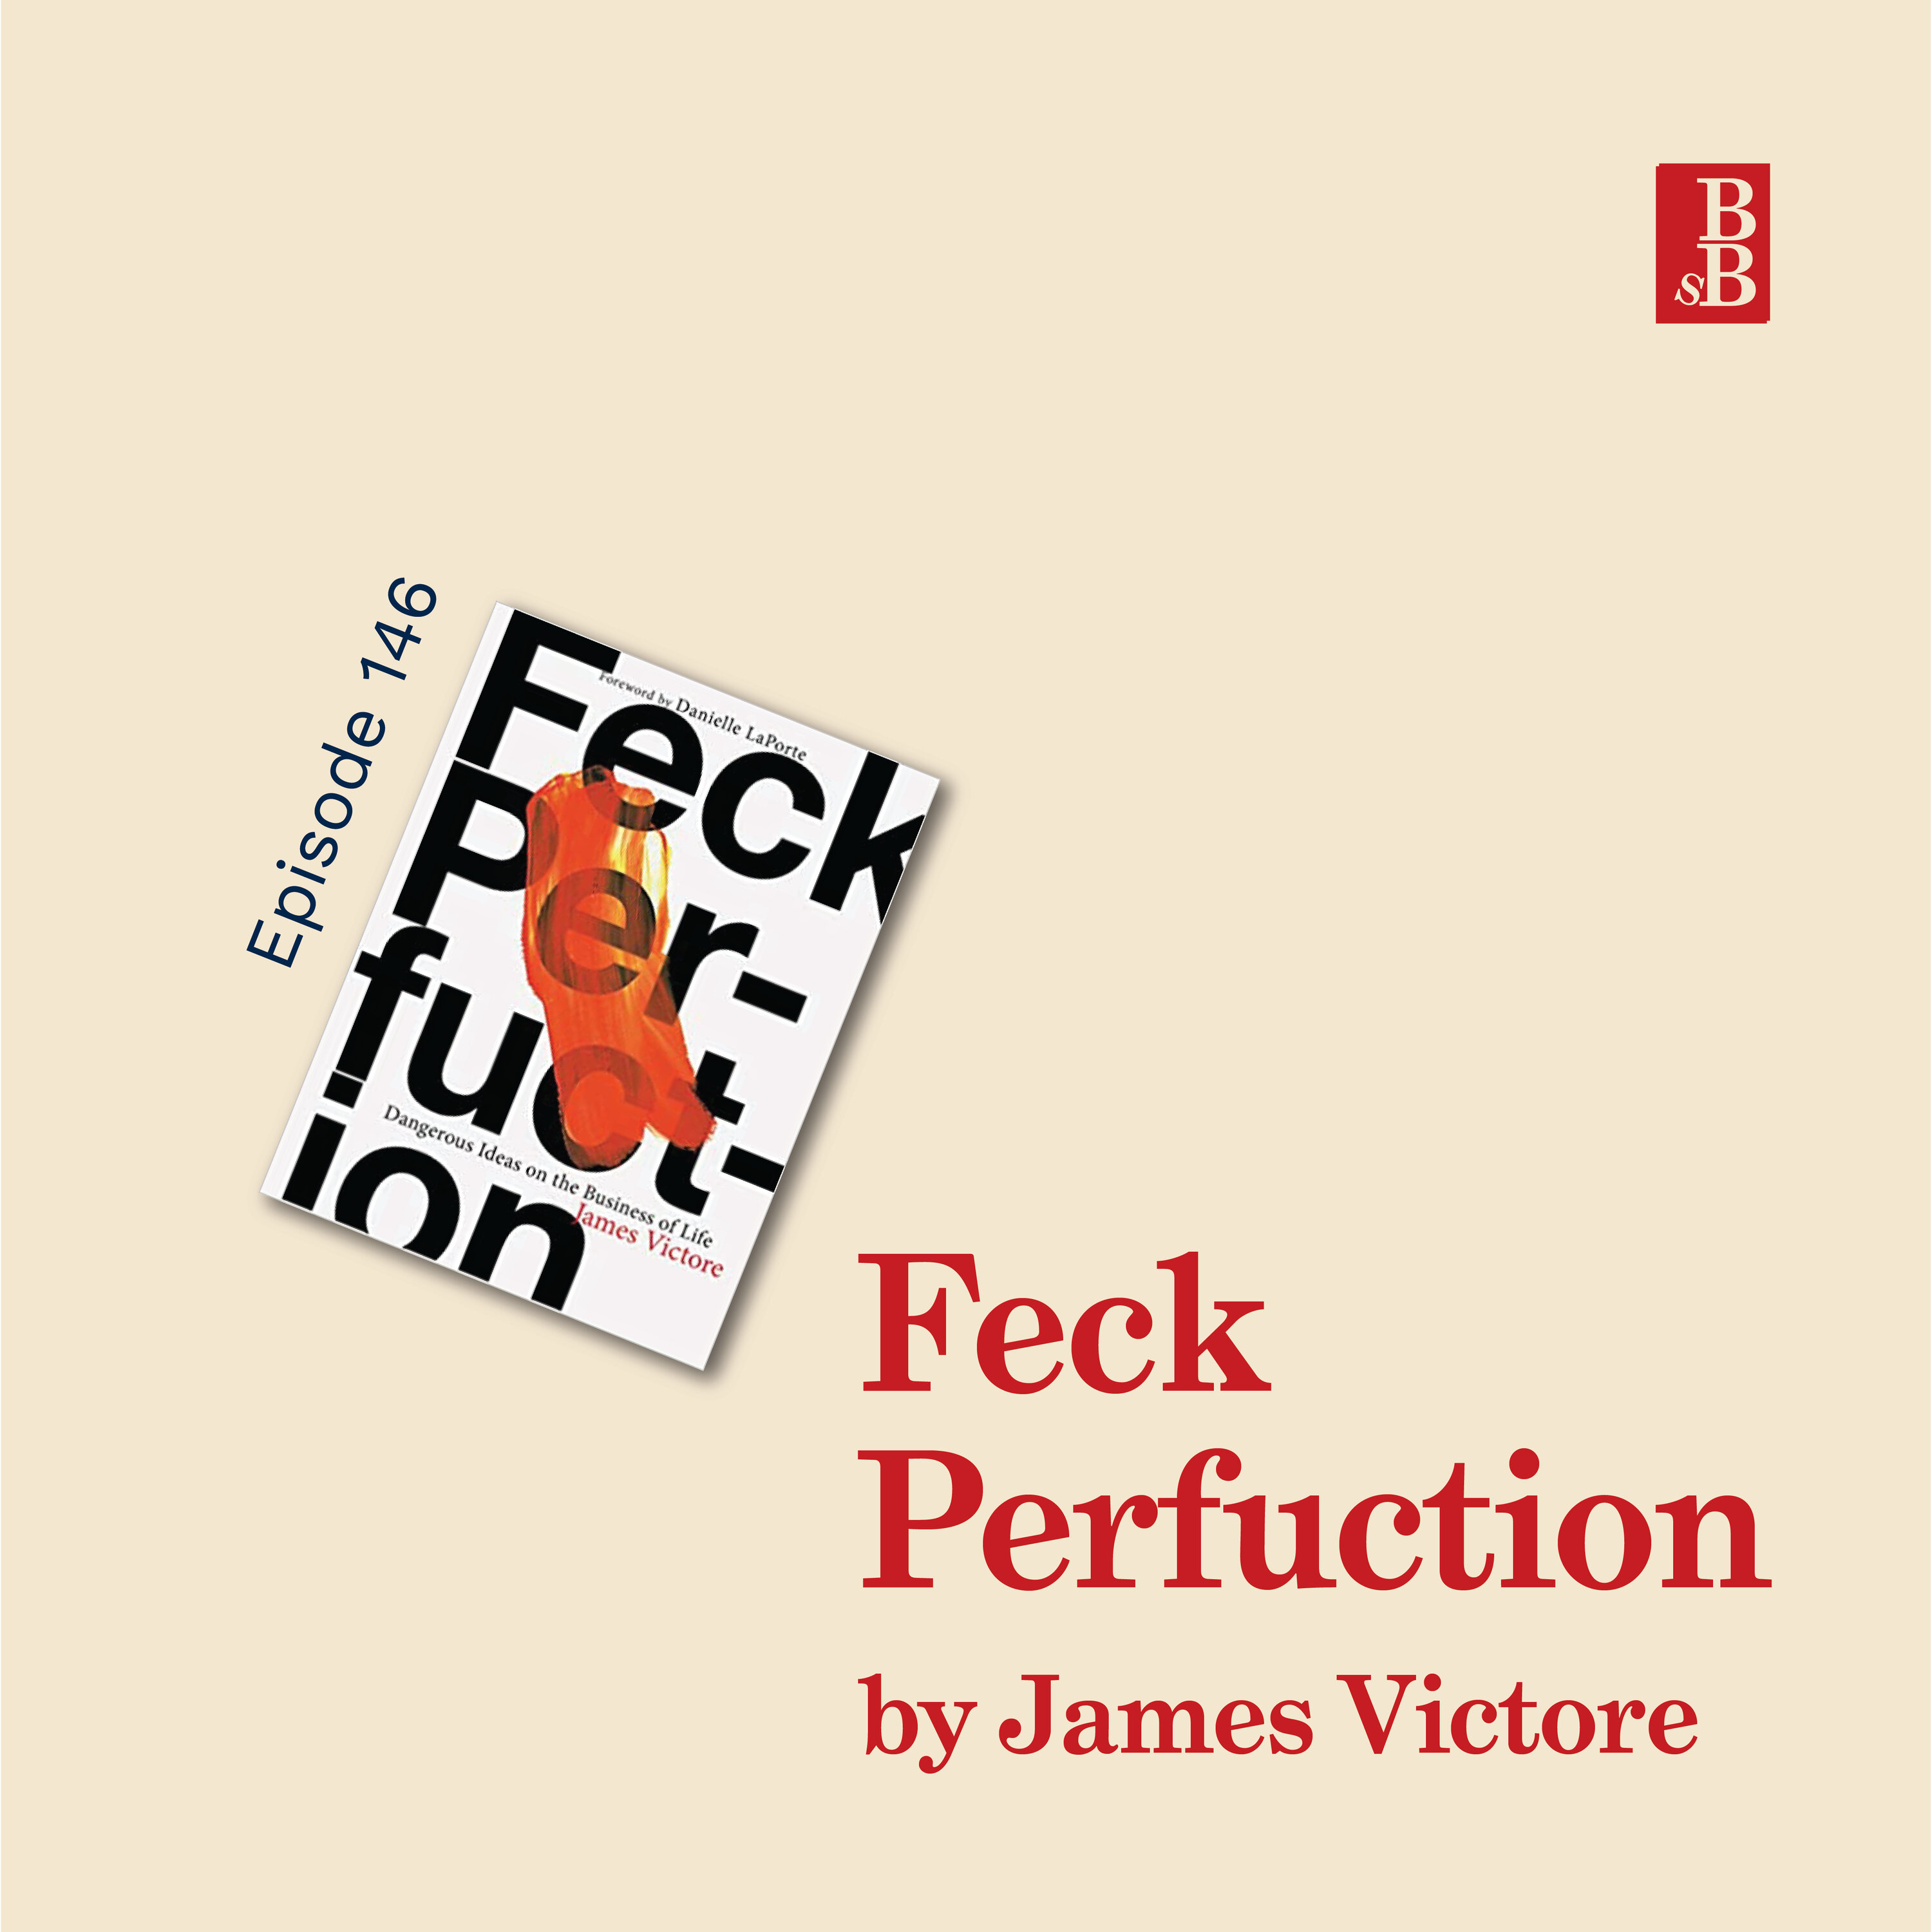 Feck Perfuction by James Victore: be more weird